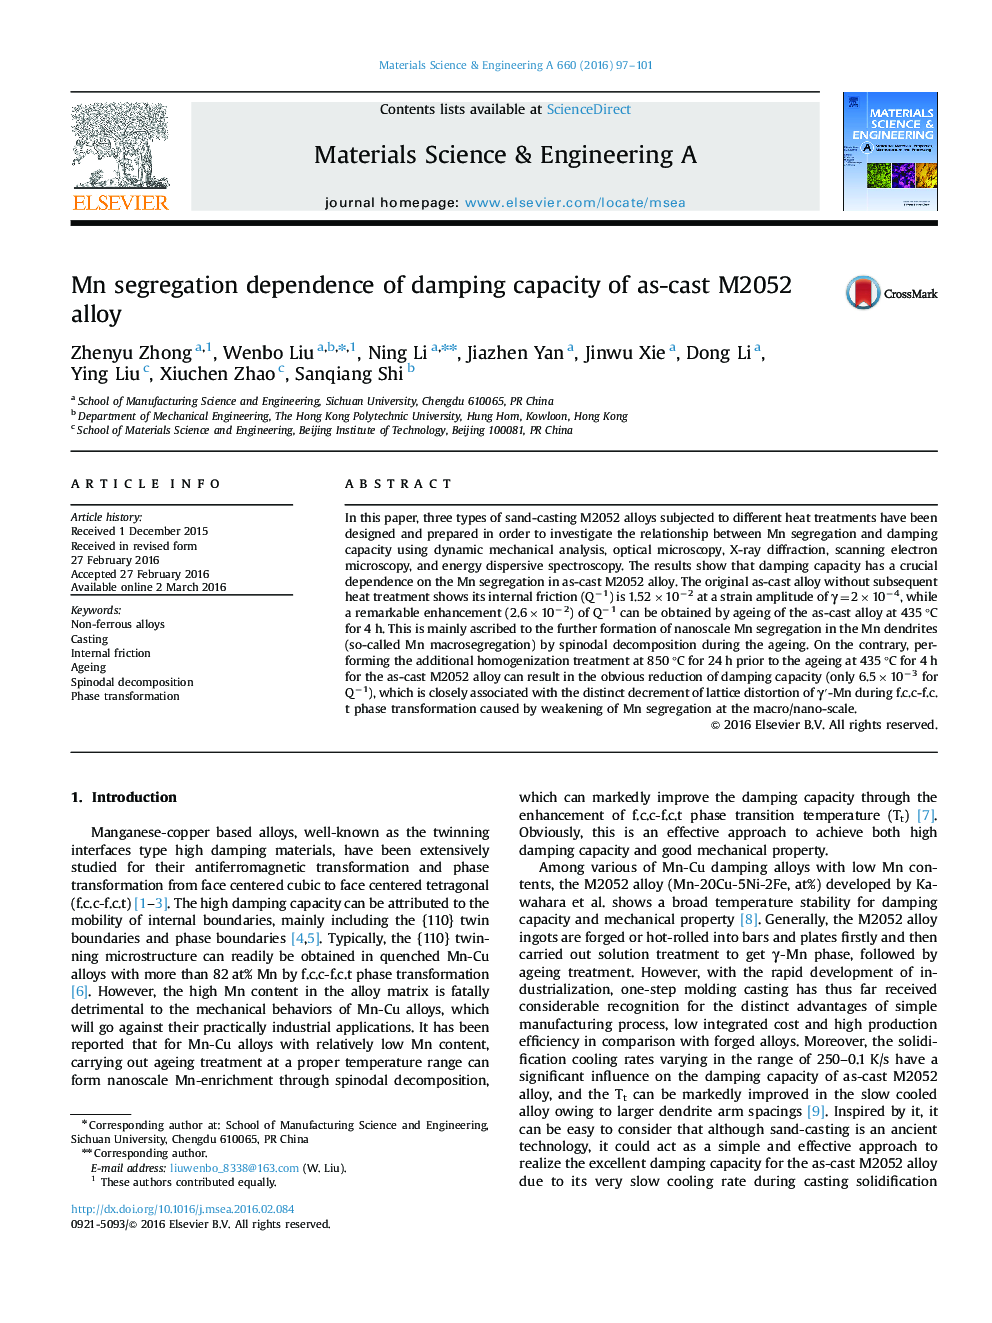 Mn segregation dependence of damping capacity of as-cast M2052 alloy